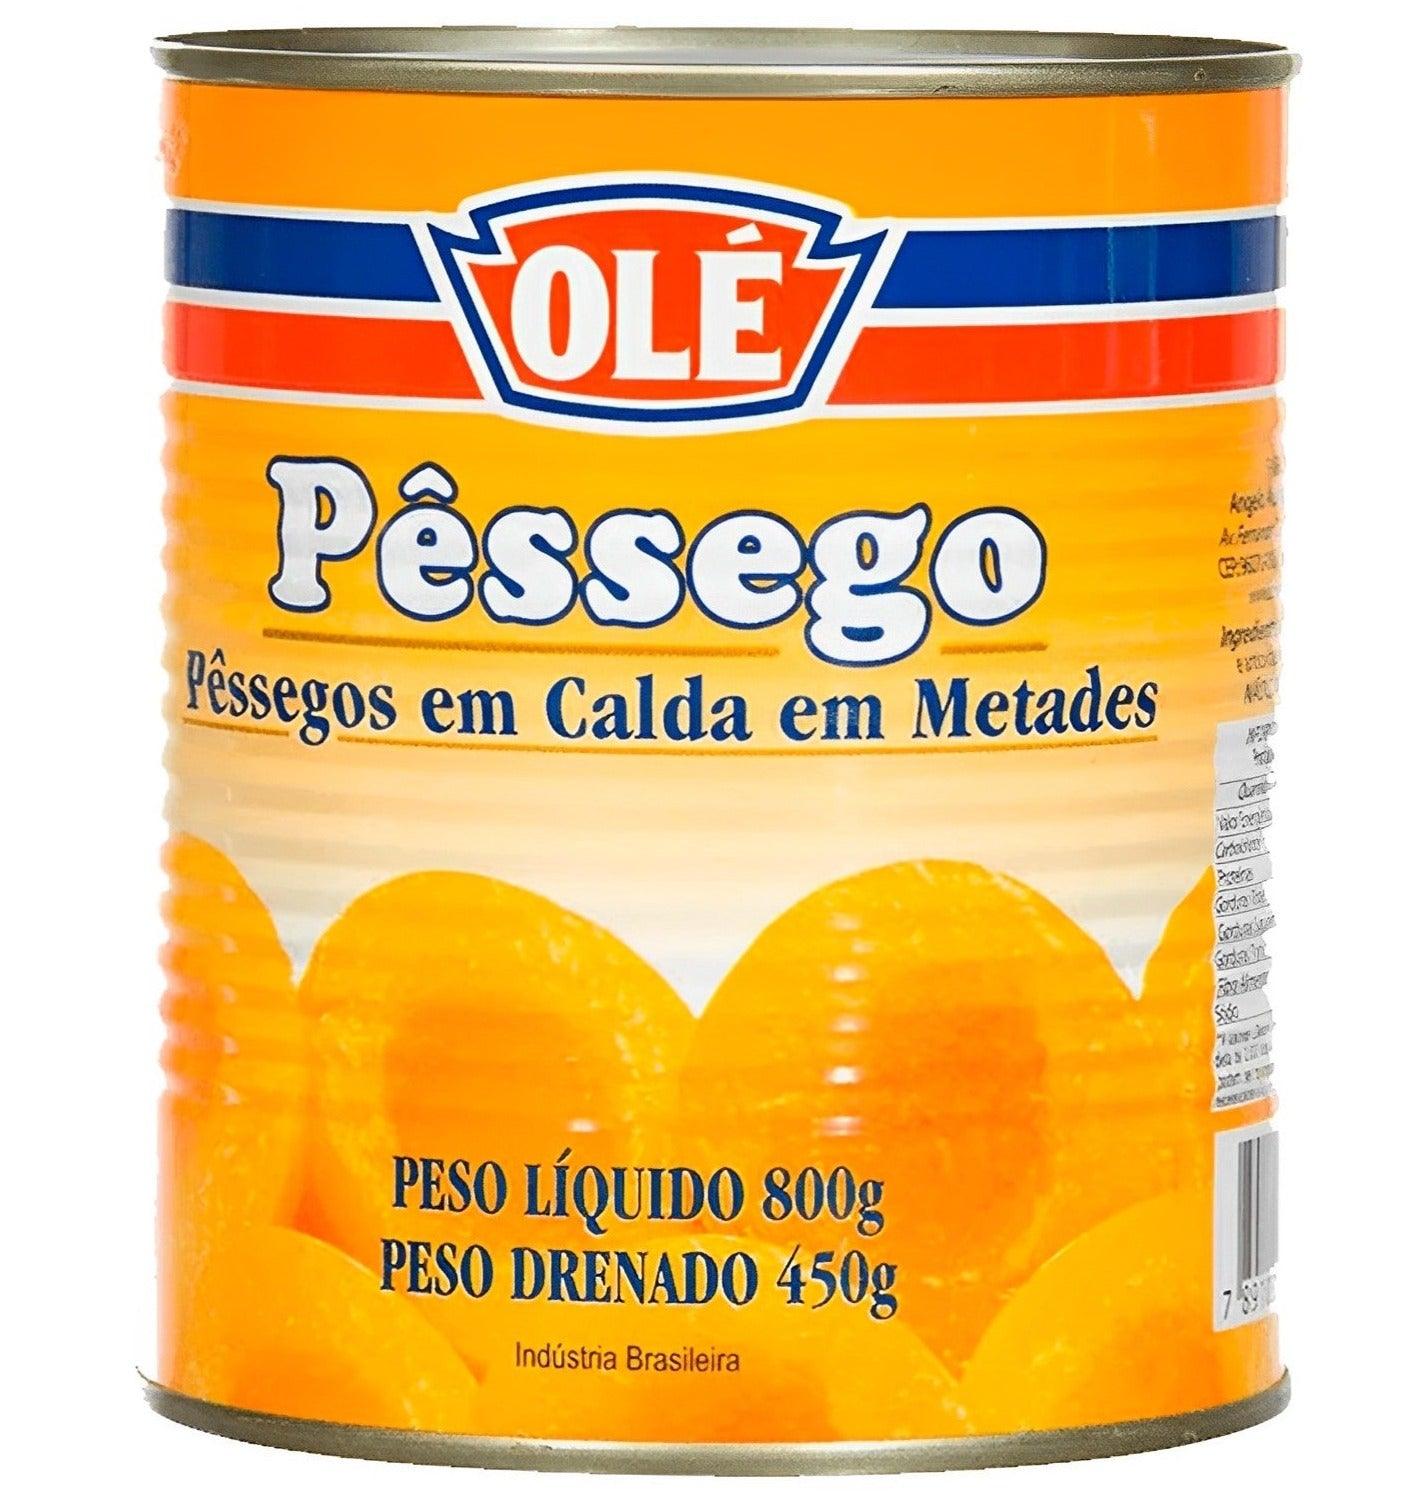 Olé Peach Halves in Syrup Can 15.87 oz. (Pack of 2) - Brazilian Shop